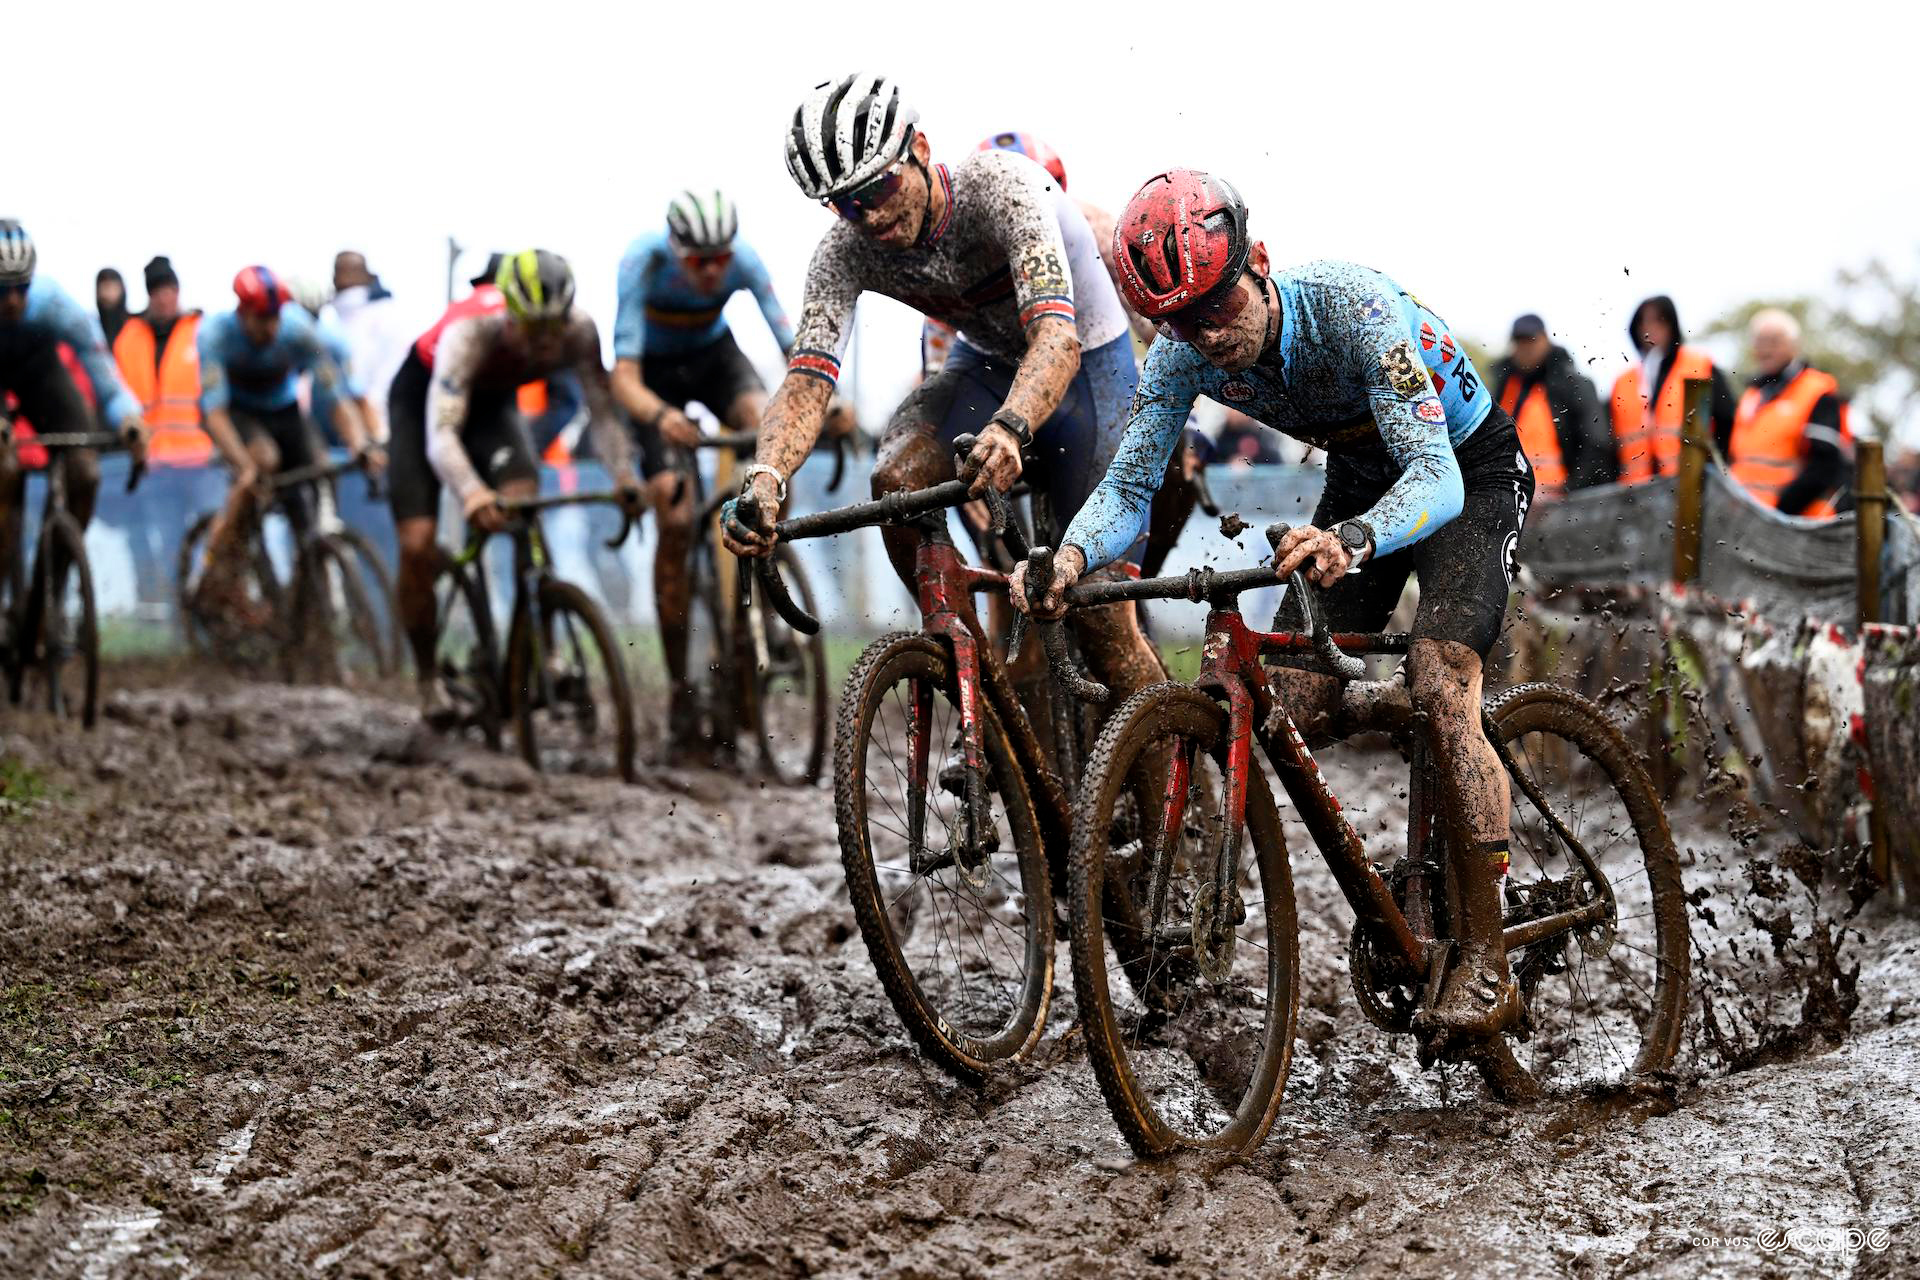 Britain's Cameron Mason and Belgian Eli Iserbyt turn through an incredibly muddy corner during the 2023 CX European Champs.